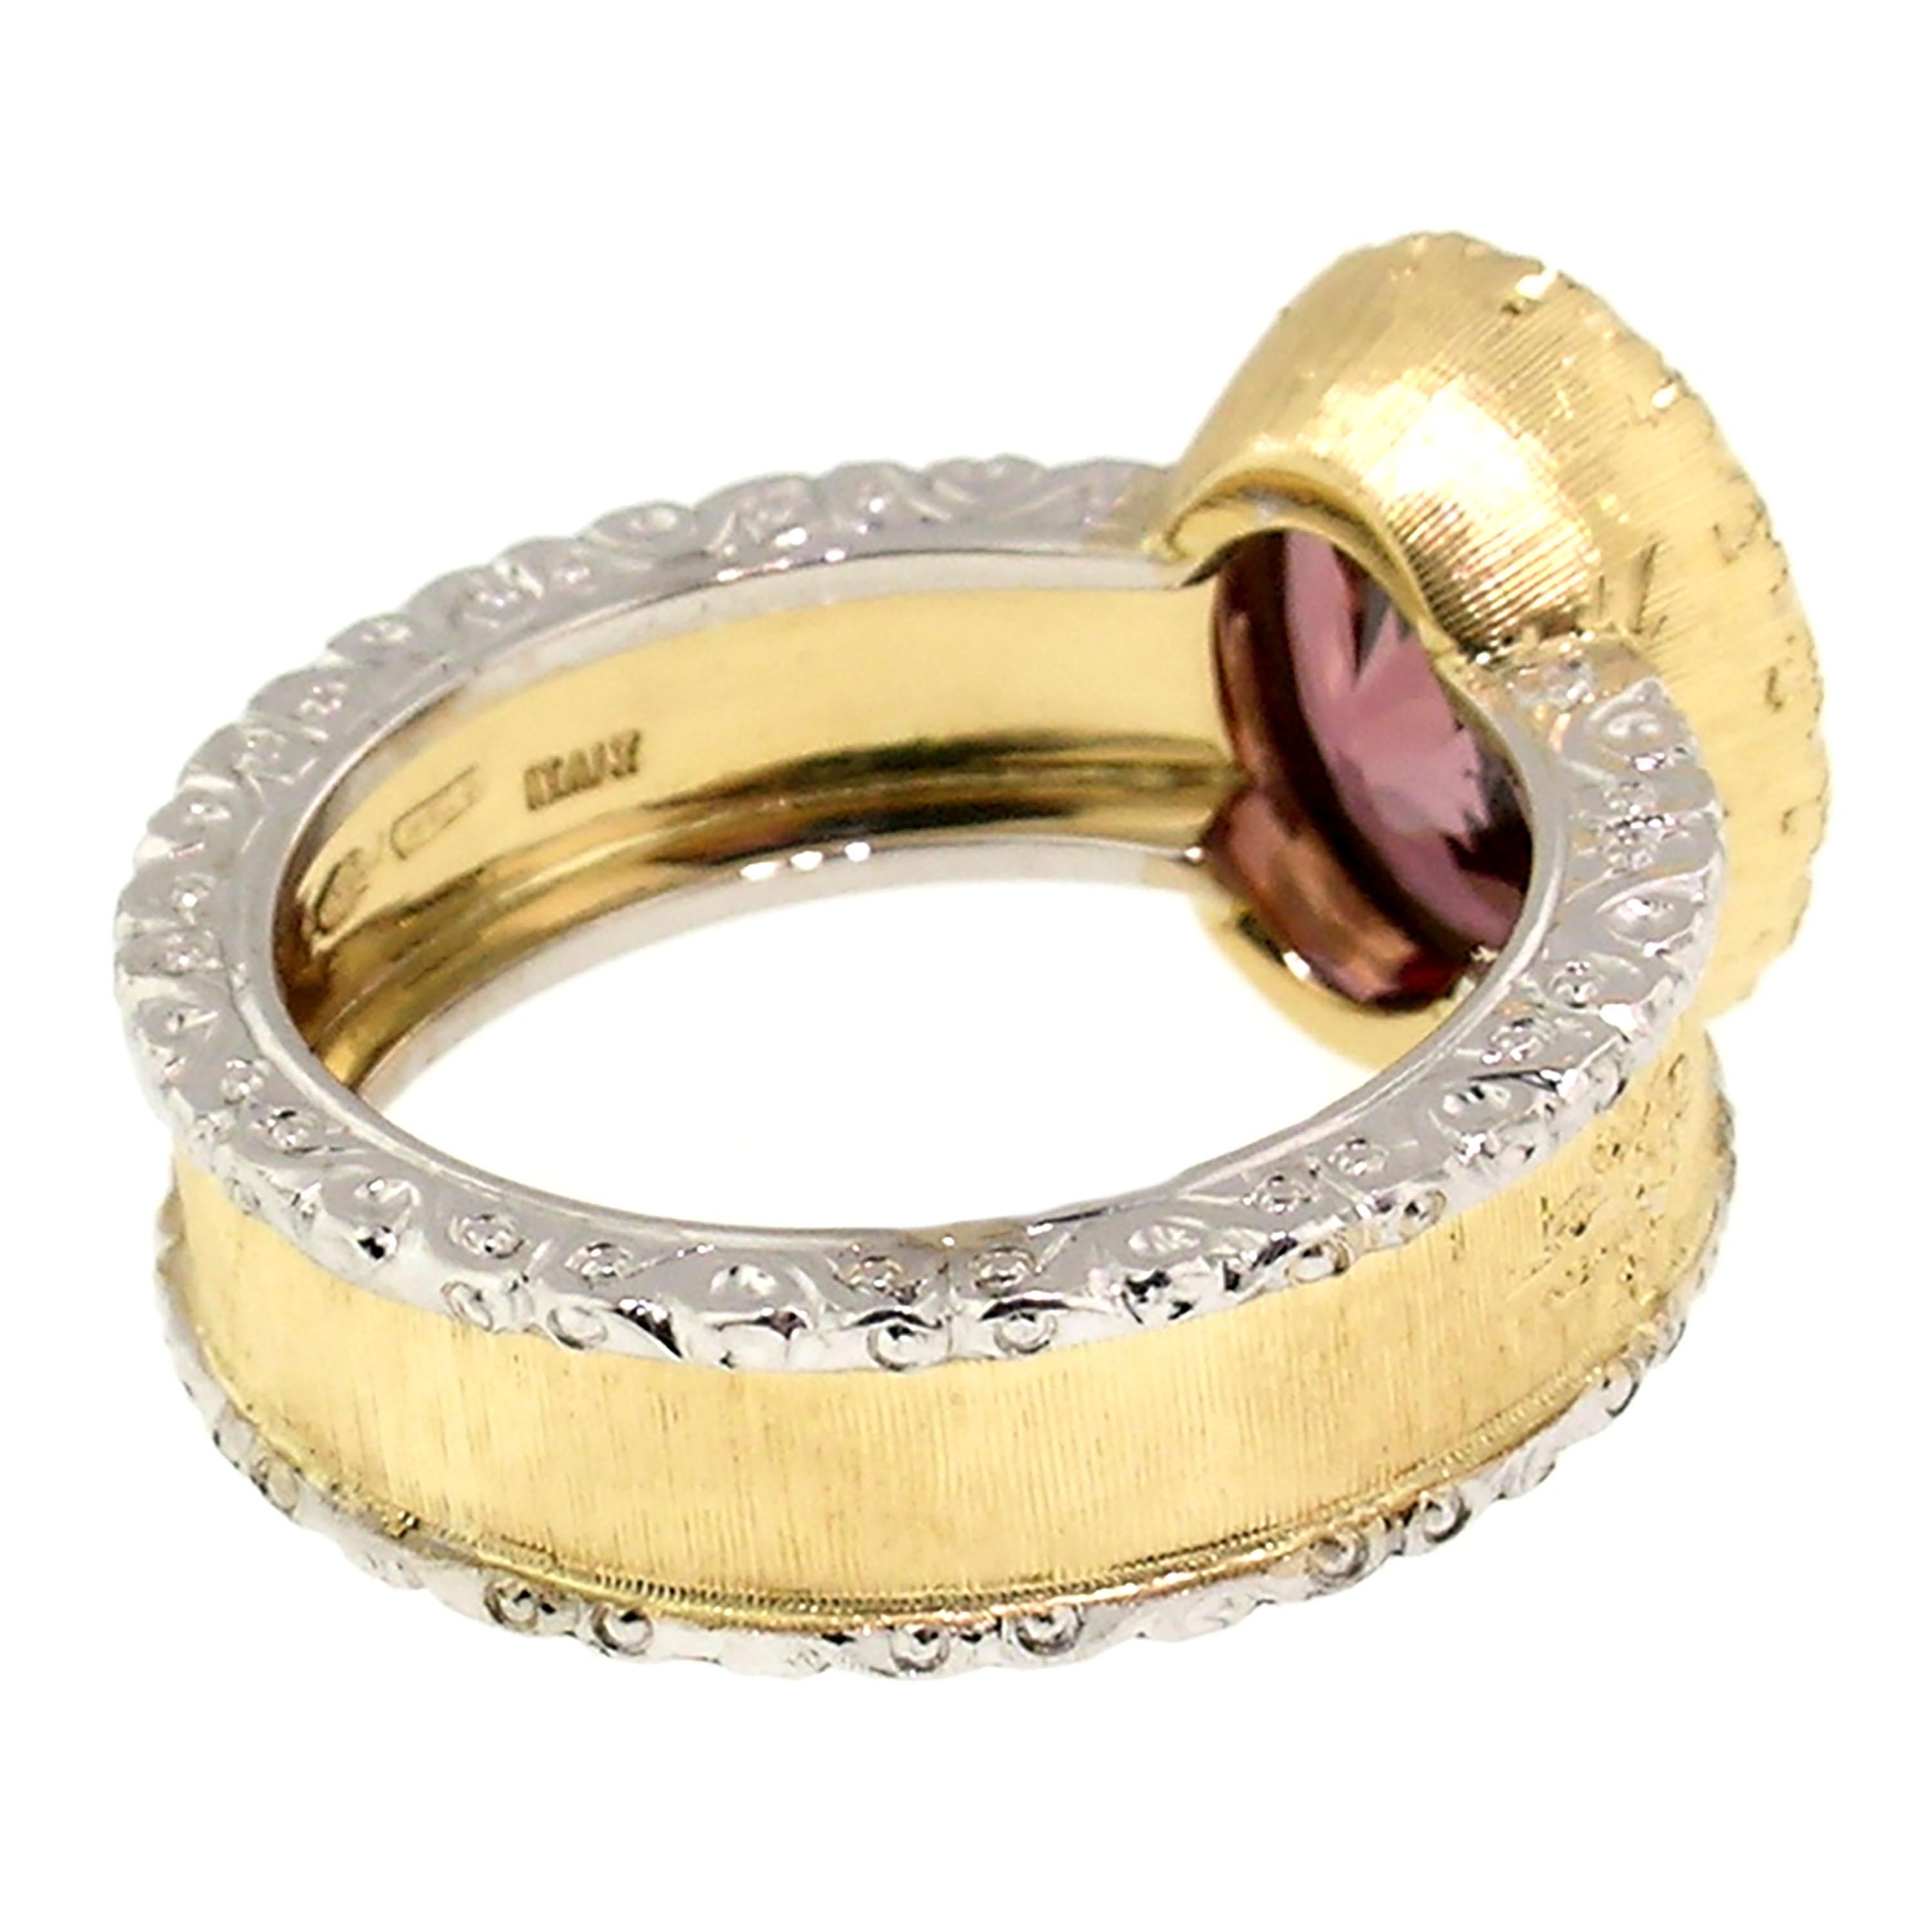 Women's 18kt Hand Engraved Ring with Tanzanian Pink Zircon, Handmade in Florence, Italy